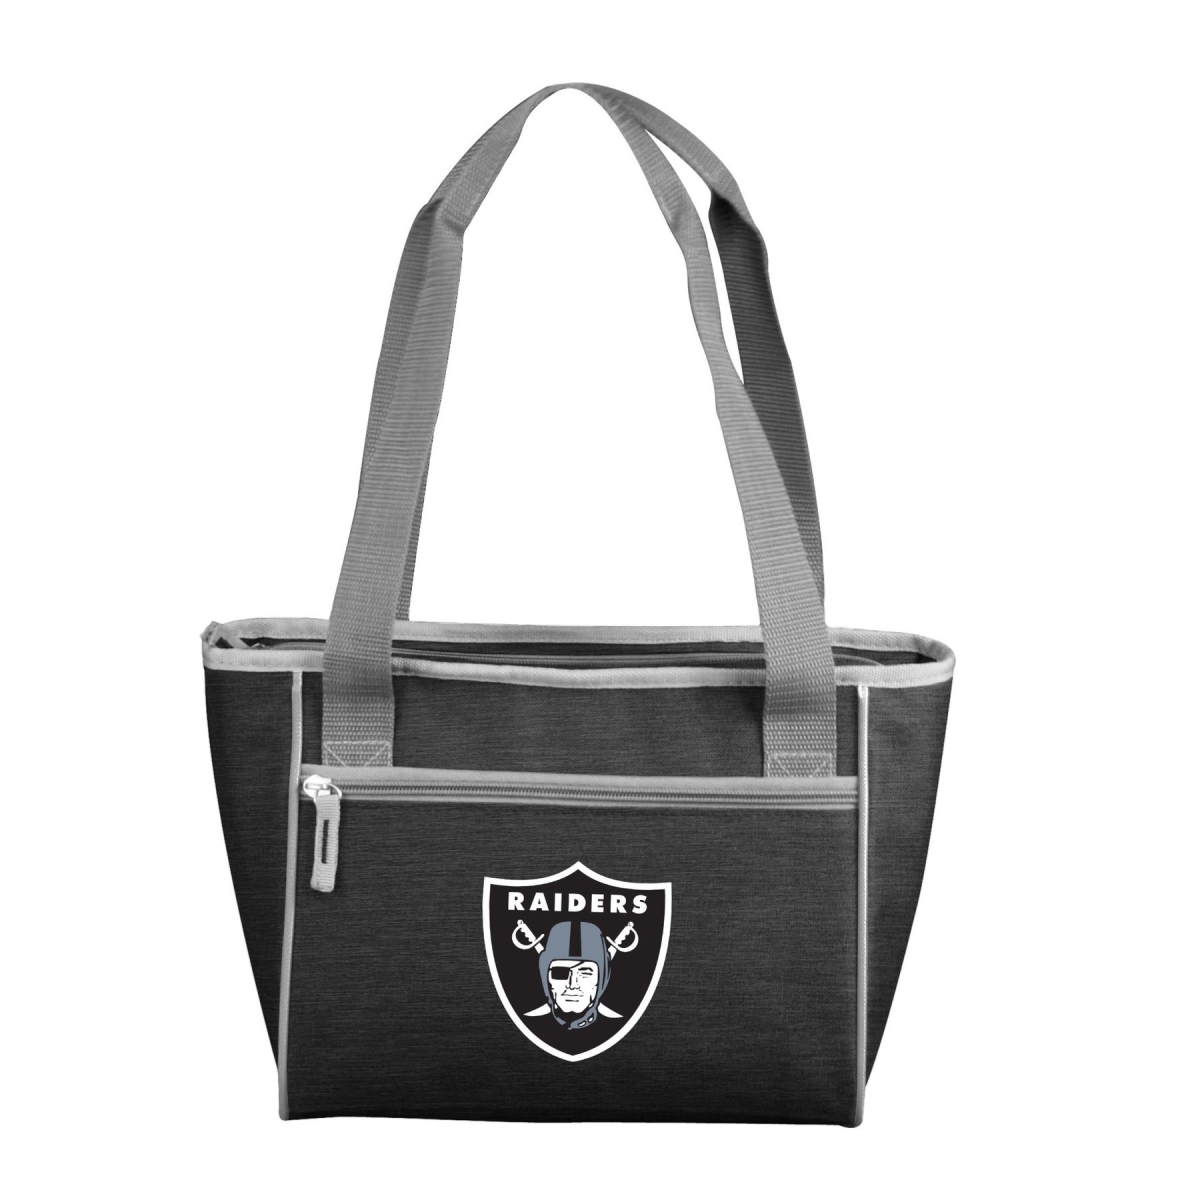 Picture of Logo Chair 623-83-CR1 NFL Las Vegas Raiders Crosshatch Cooler Tote Bag Holds for 16 Cans